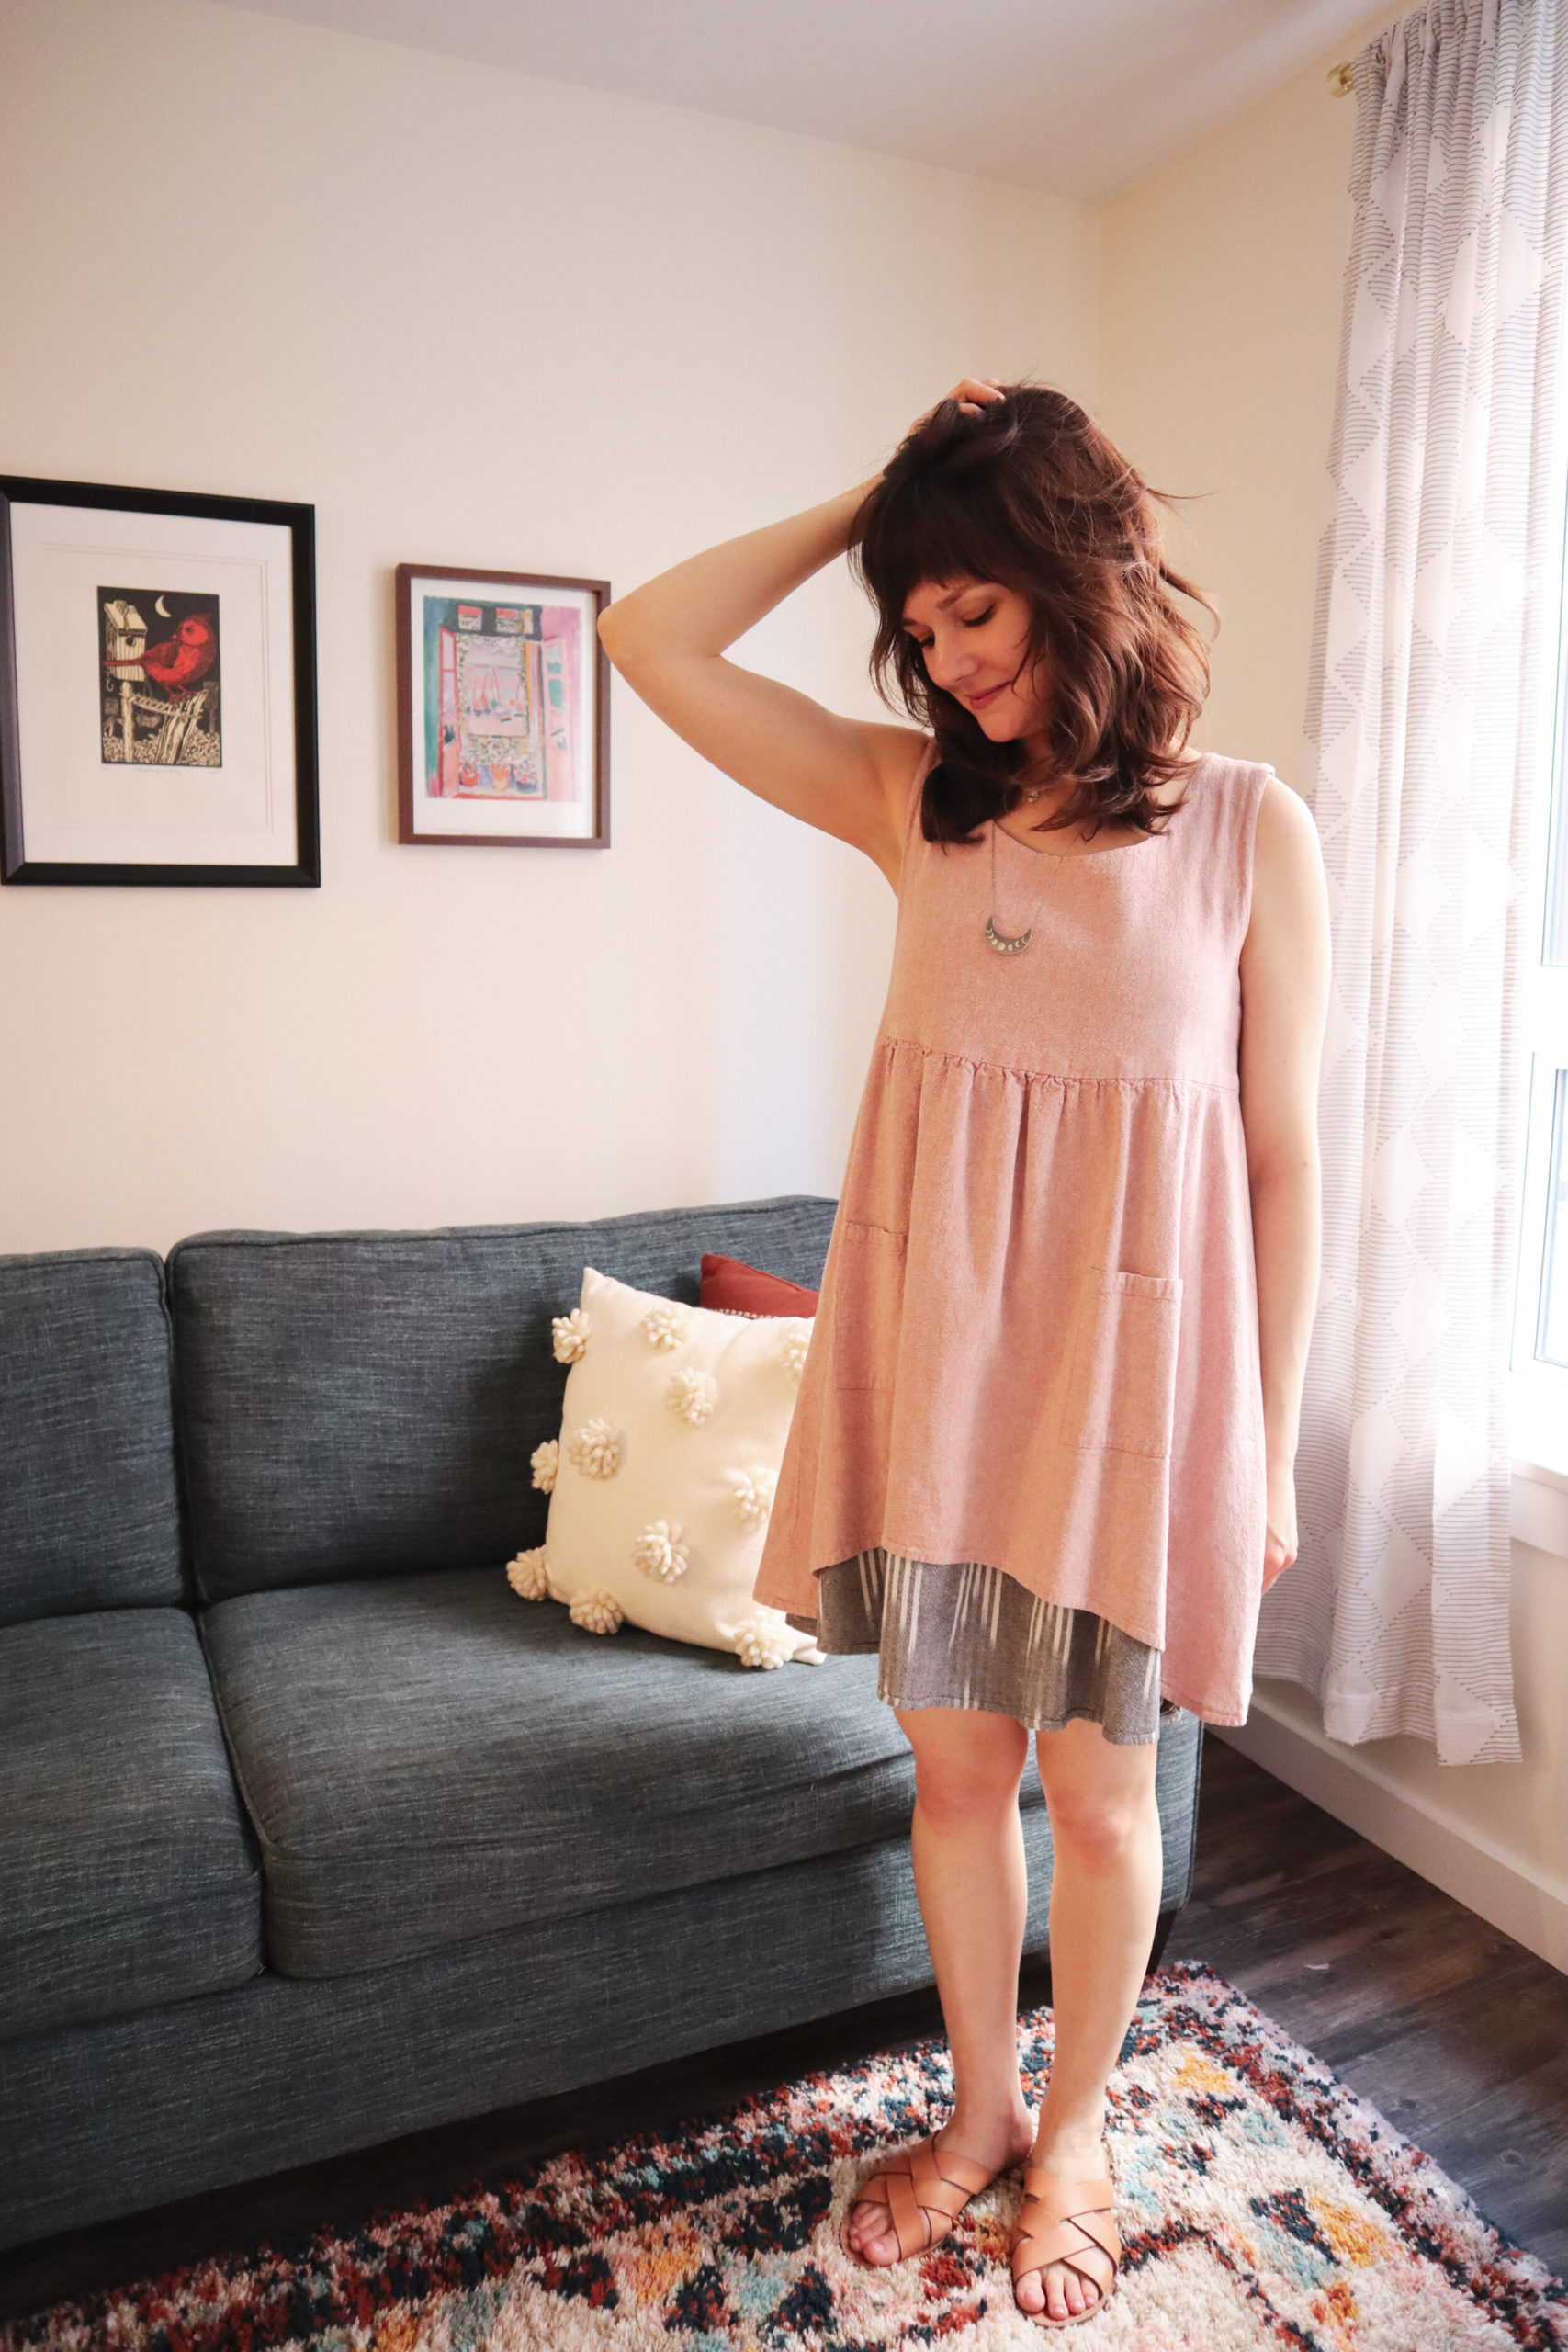 Meredith wears a pink metamorphic dress with a grey ikat underlayer and tan sandals